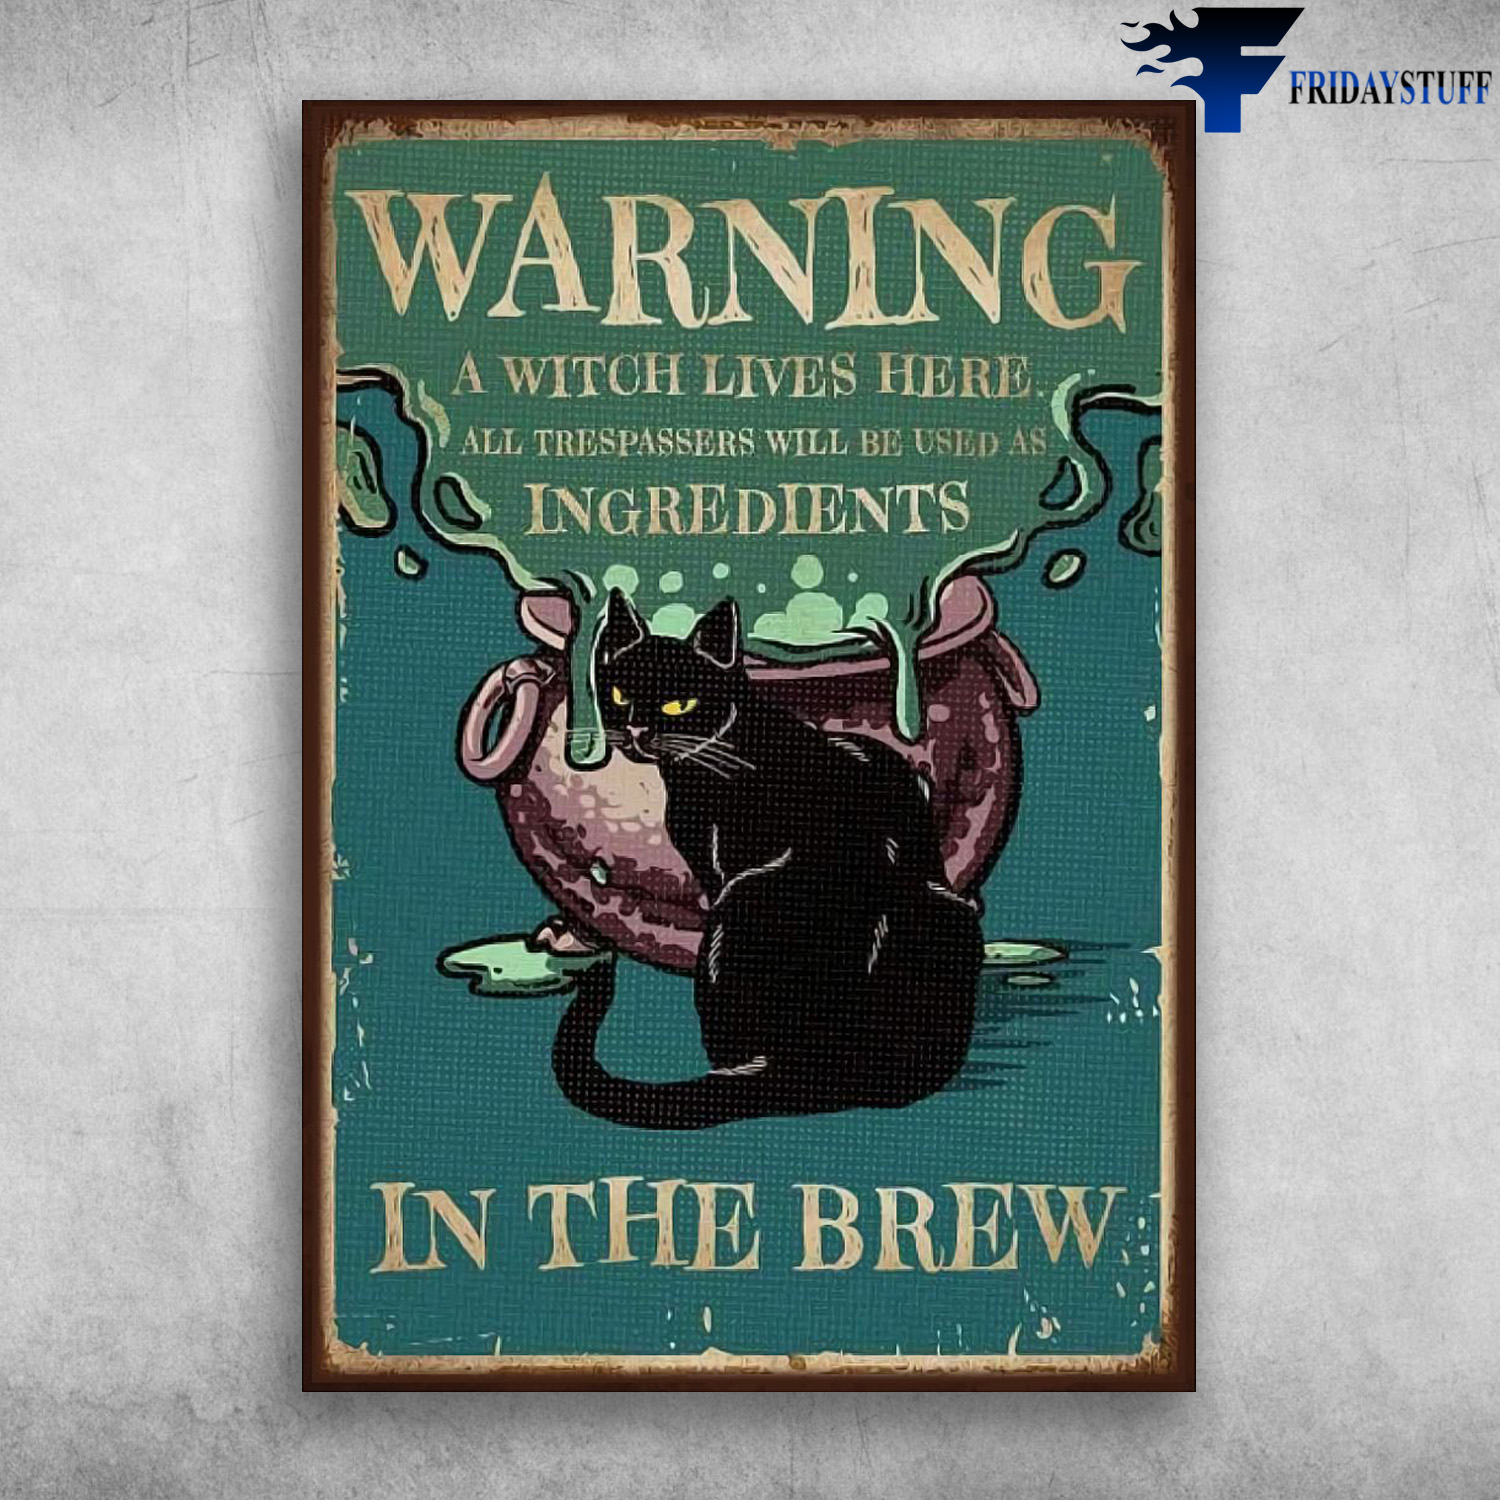 Black Cat - Warning A Witch Lives Here, All Trespassers Will Be Used As Ingredients, In The Brew